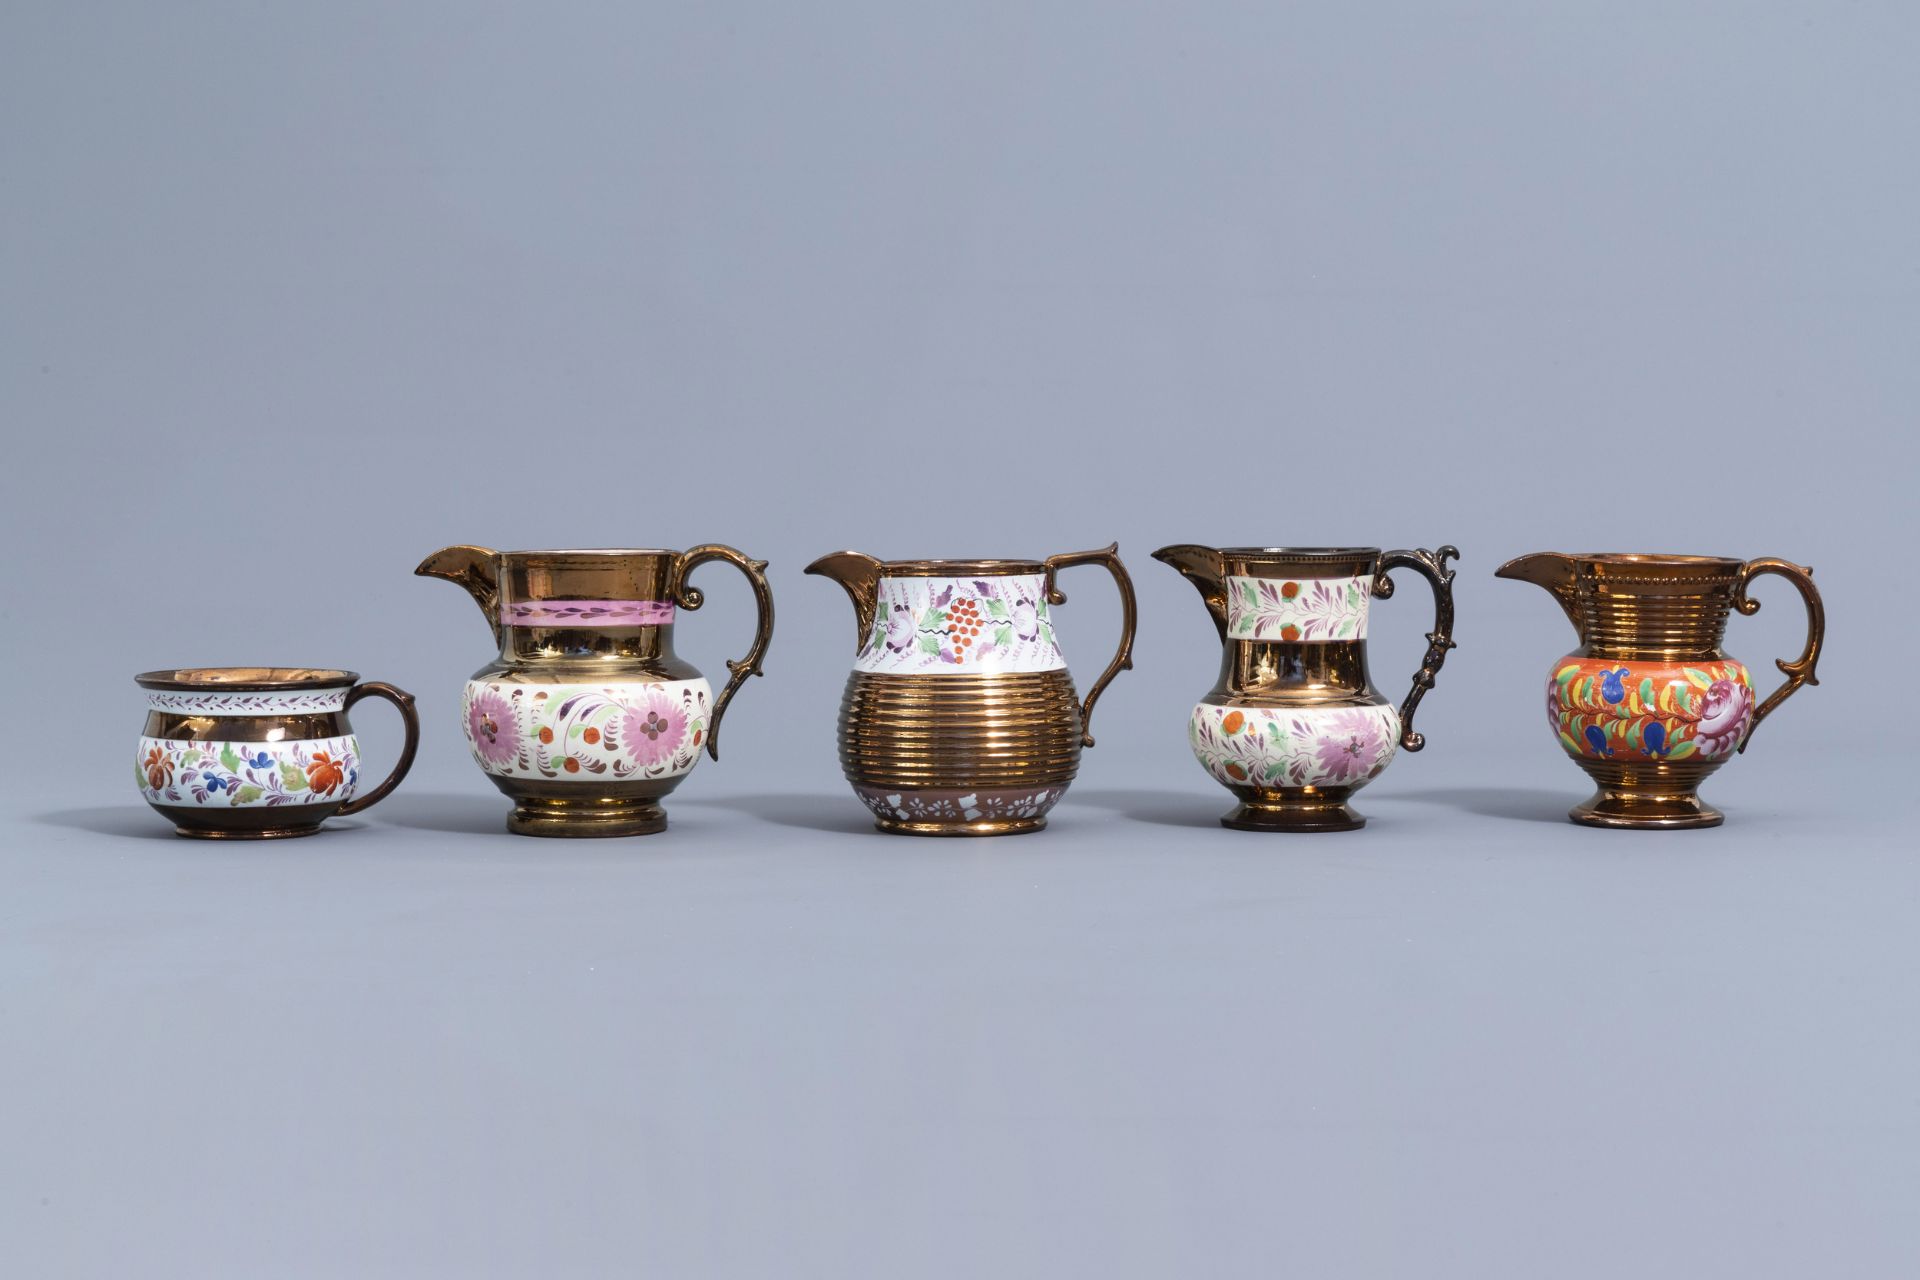 A varied collection of English lustreware items with polychrome floral design, 19th C. - Image 12 of 64